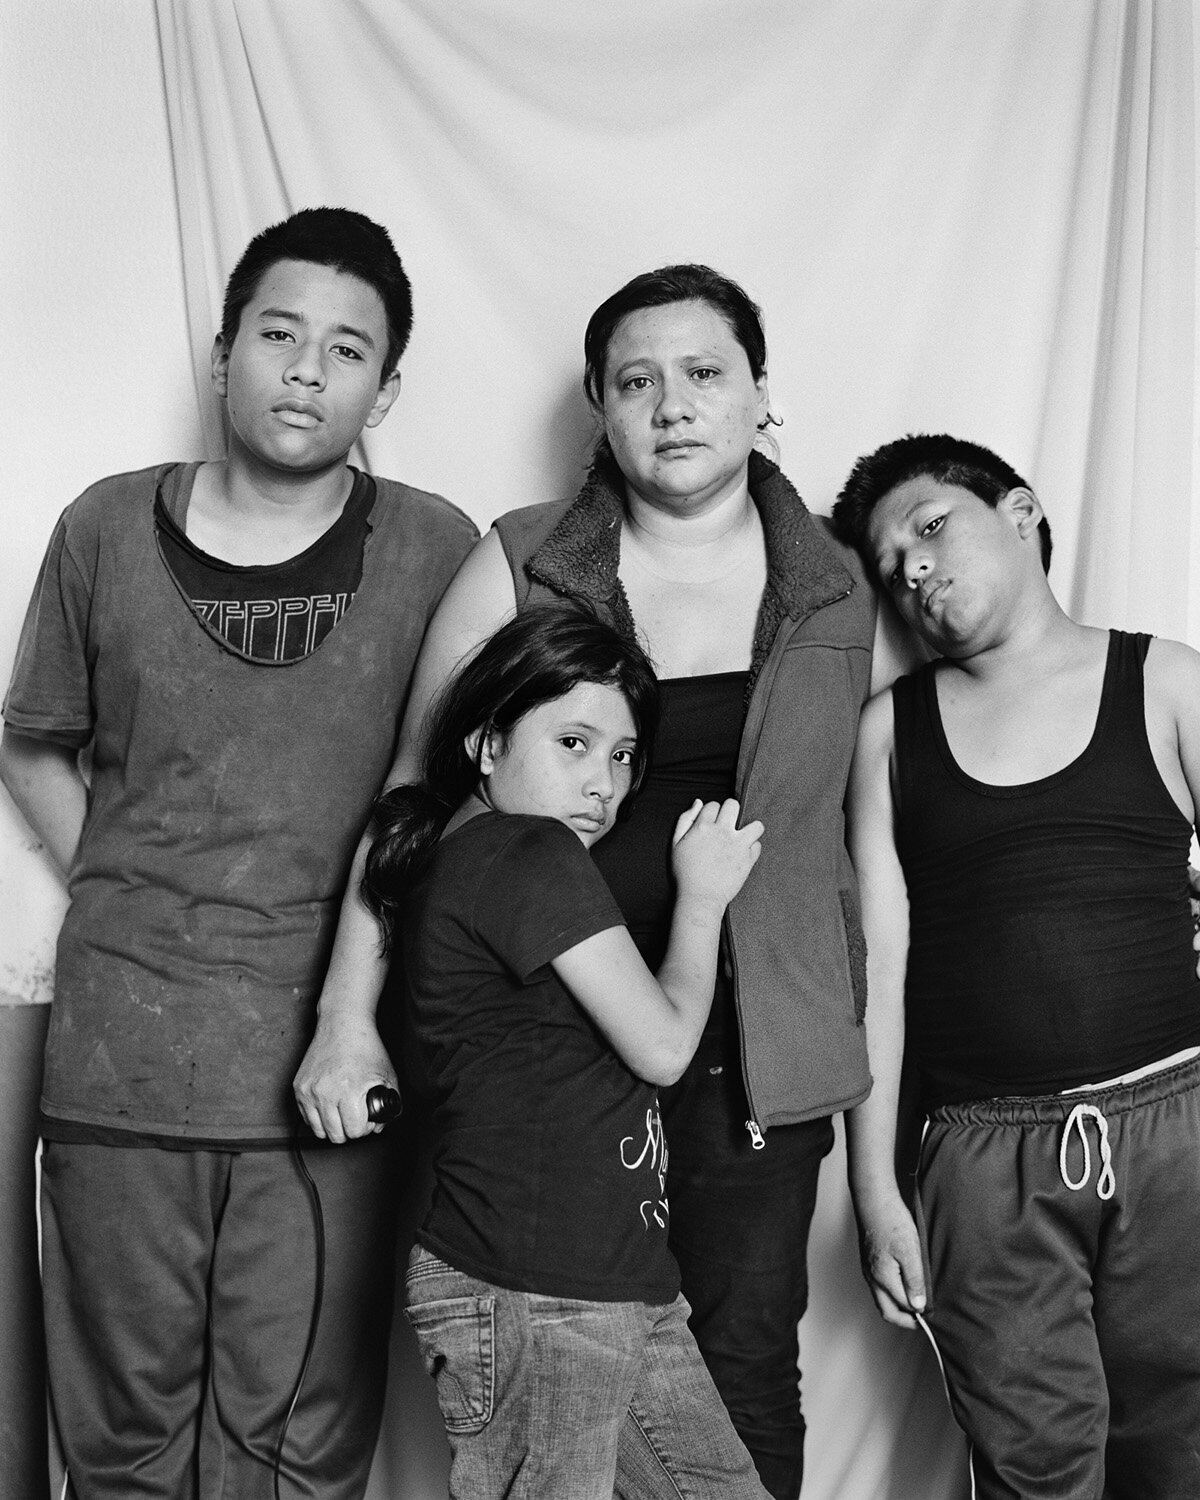  América Yanira López, 35, and her children, Miguel, 12, Philipe, 10, and Adriana, 7, from El Salvador, at a Catholic shelter in Reynosa, Mexico. Photograph by América Yanira López and Adam Ferguson 